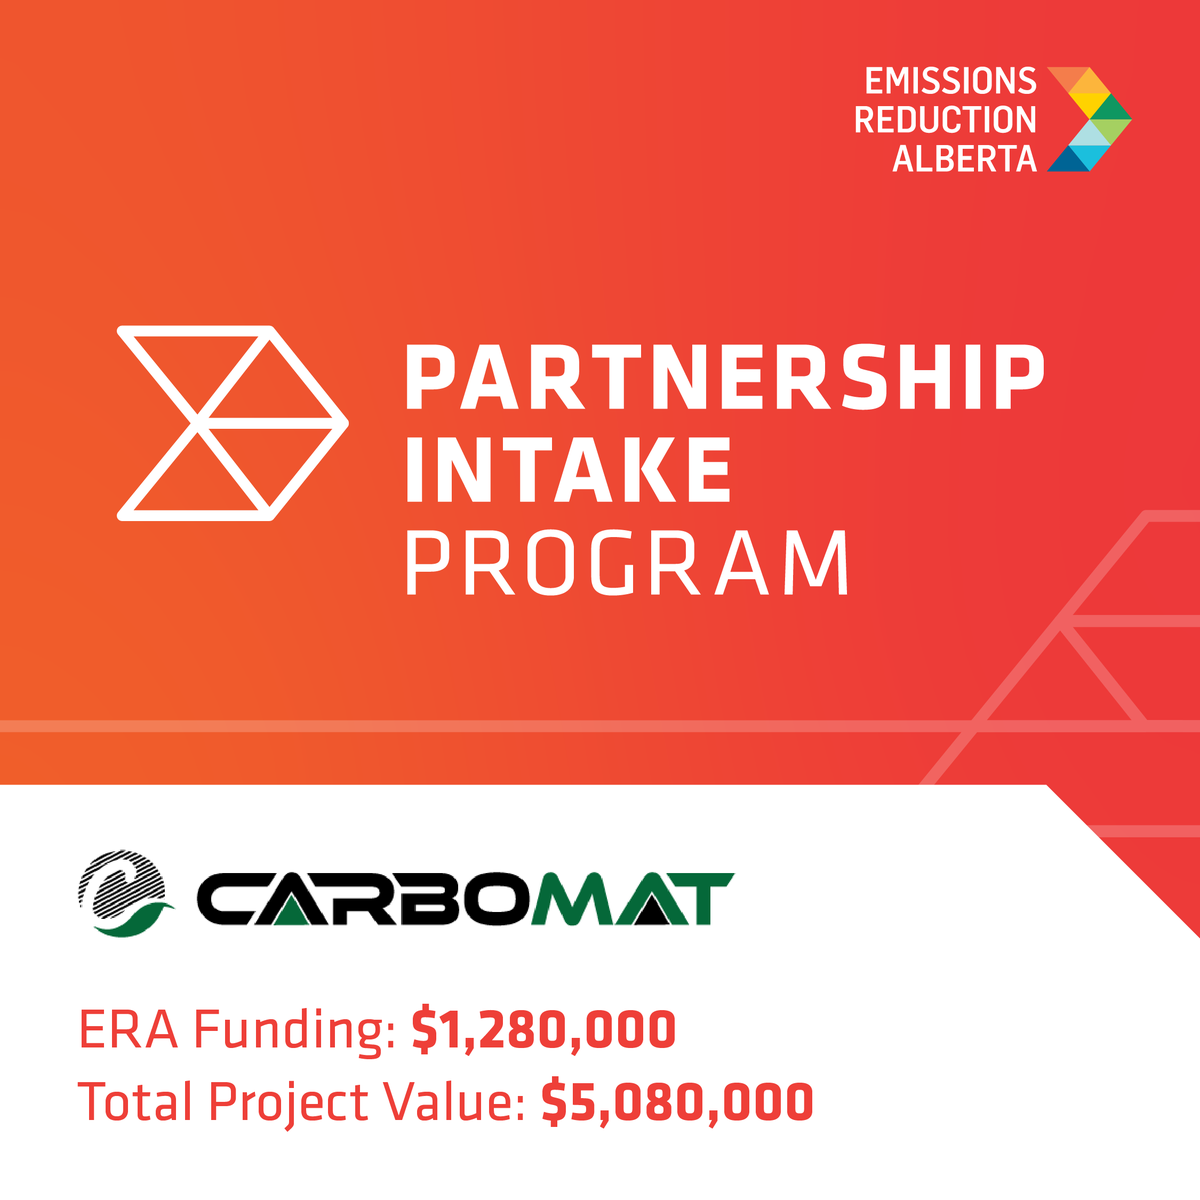 With a $1.2M investment from ERA, CarboMat Inc. has developed innovative technology to produce high-value carbon fibre from asphaltene. #PartnershipIntakeProgram #ERAFunded @YourAlberta @rebeccakschulz